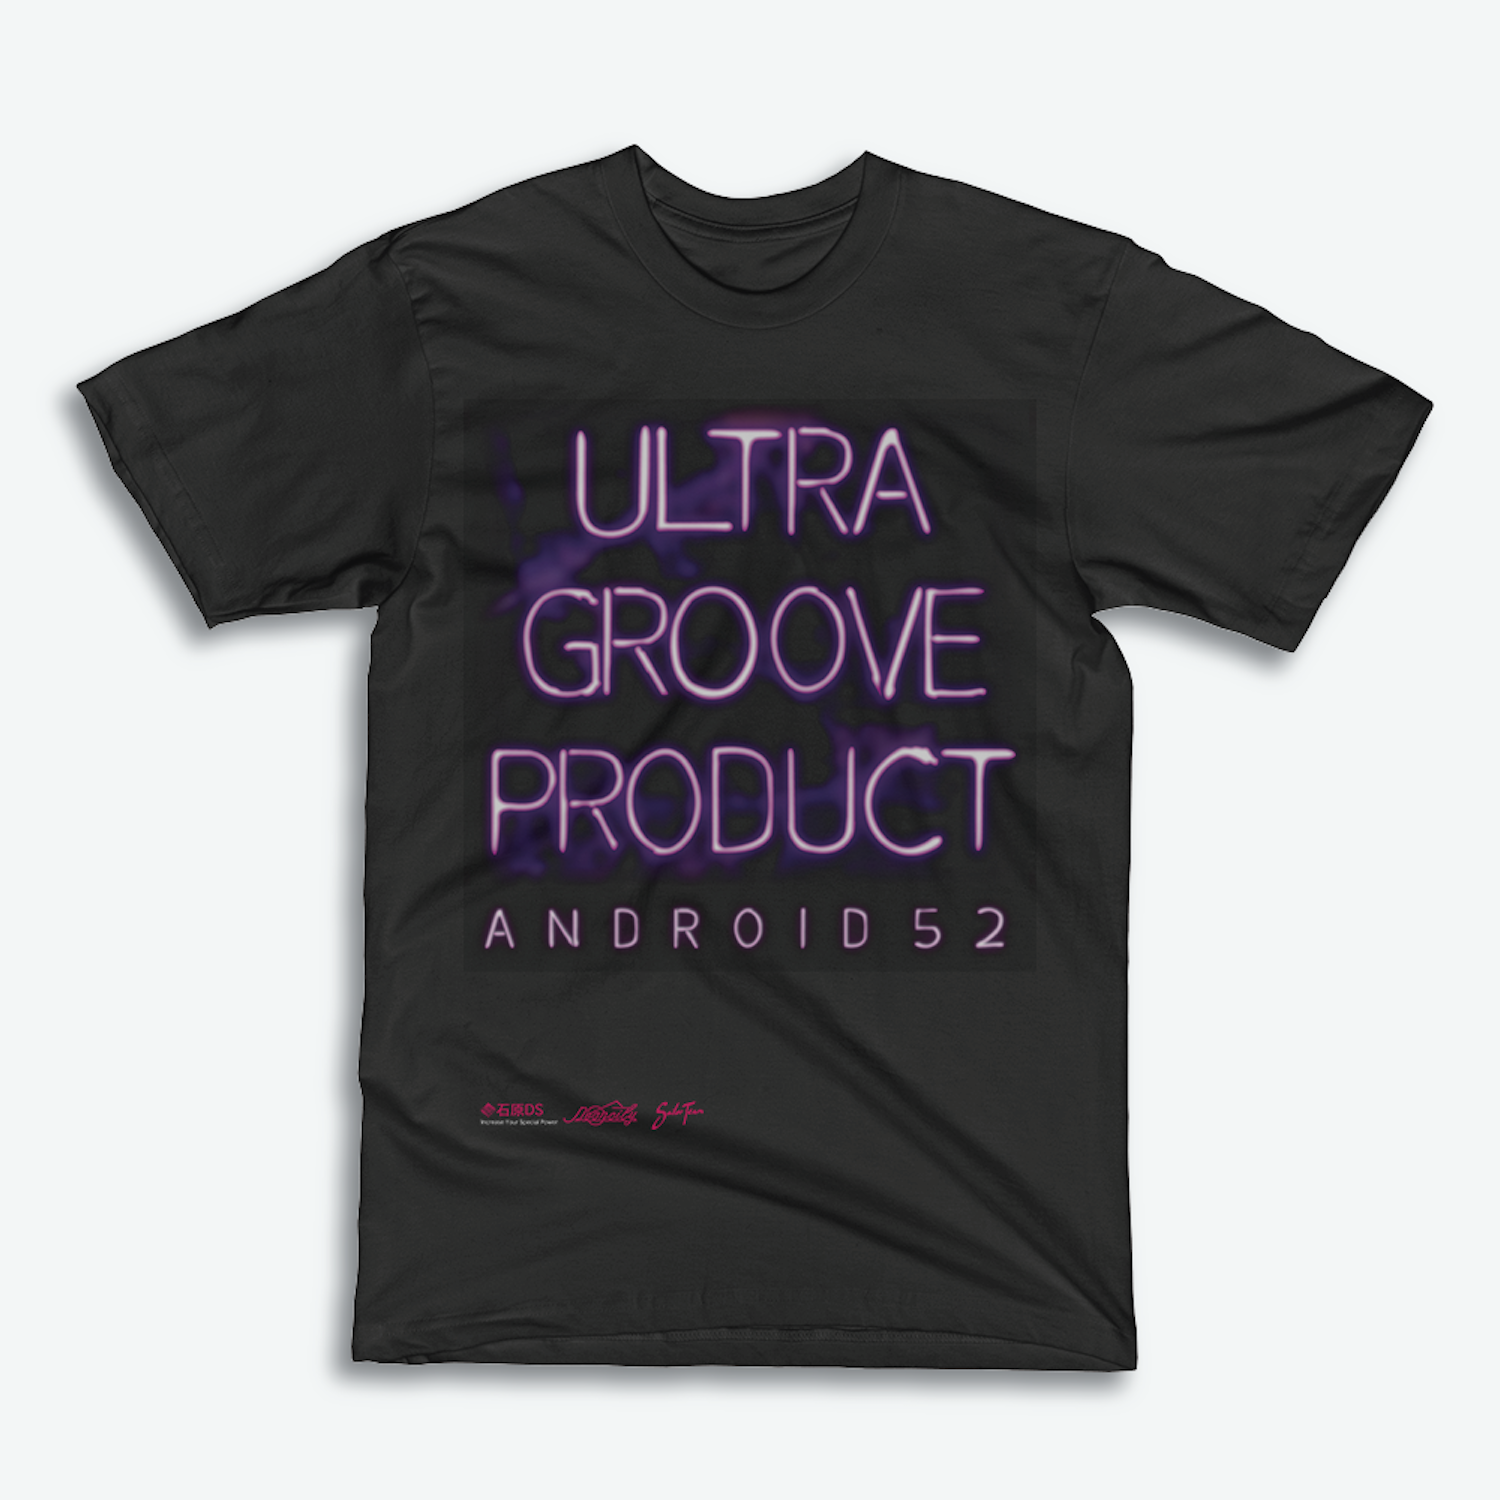 ANDROID52 - "ULTRA GROOVE PRODUCT" Tees are out !